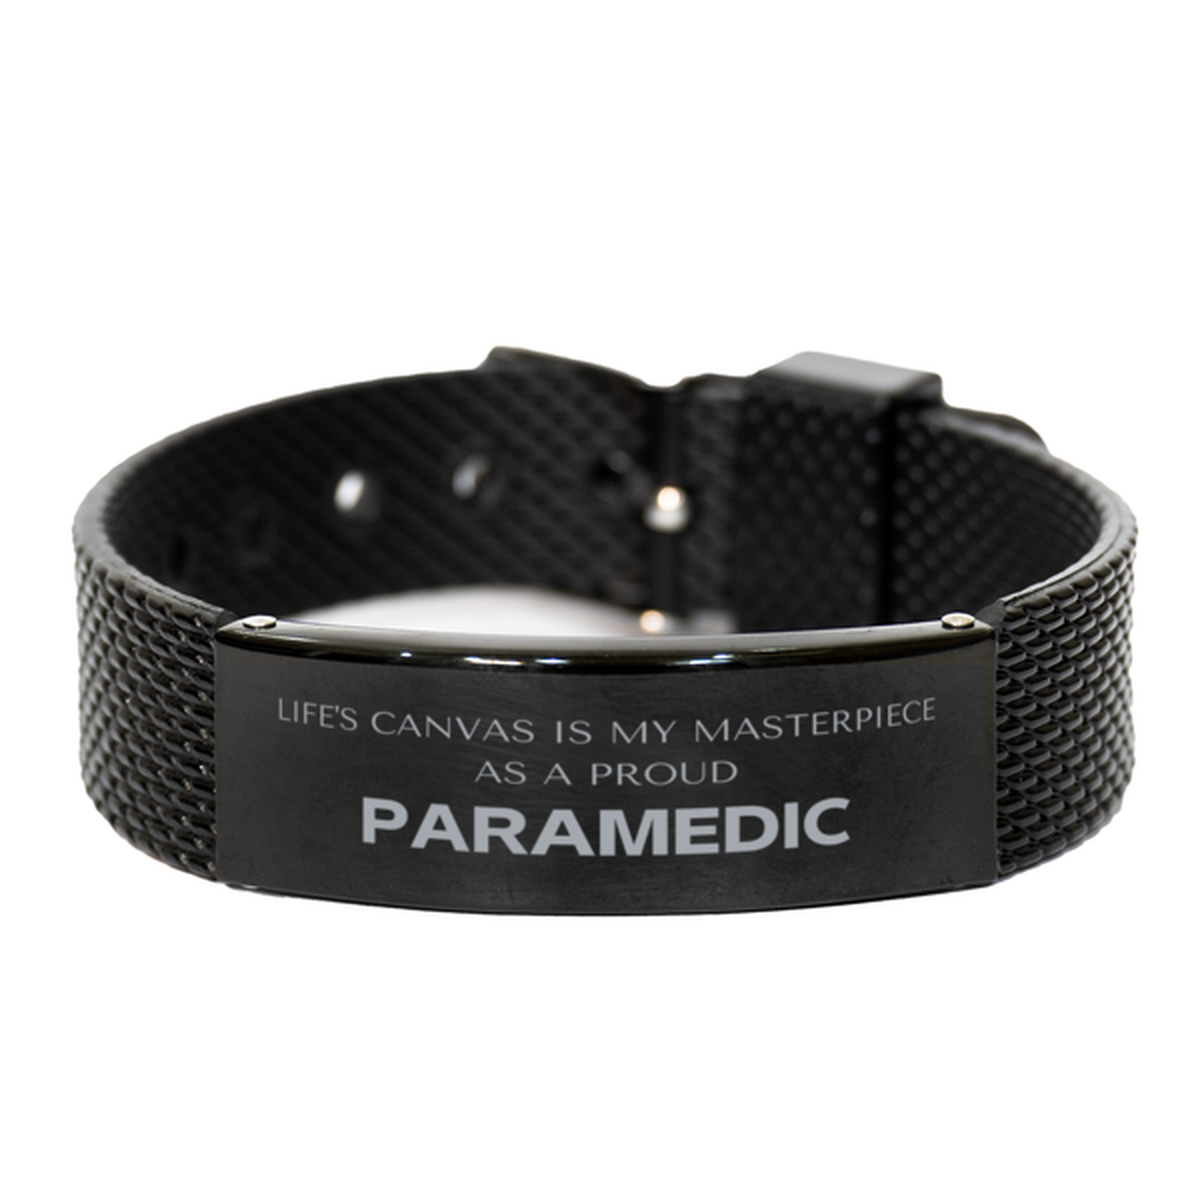 Proud Paramedic Gifts, Life's canvas is my masterpiece, Epic Birthday Christmas Unique Black Shark Mesh Bracelet For Paramedic, Coworkers, Men, Women, Friends